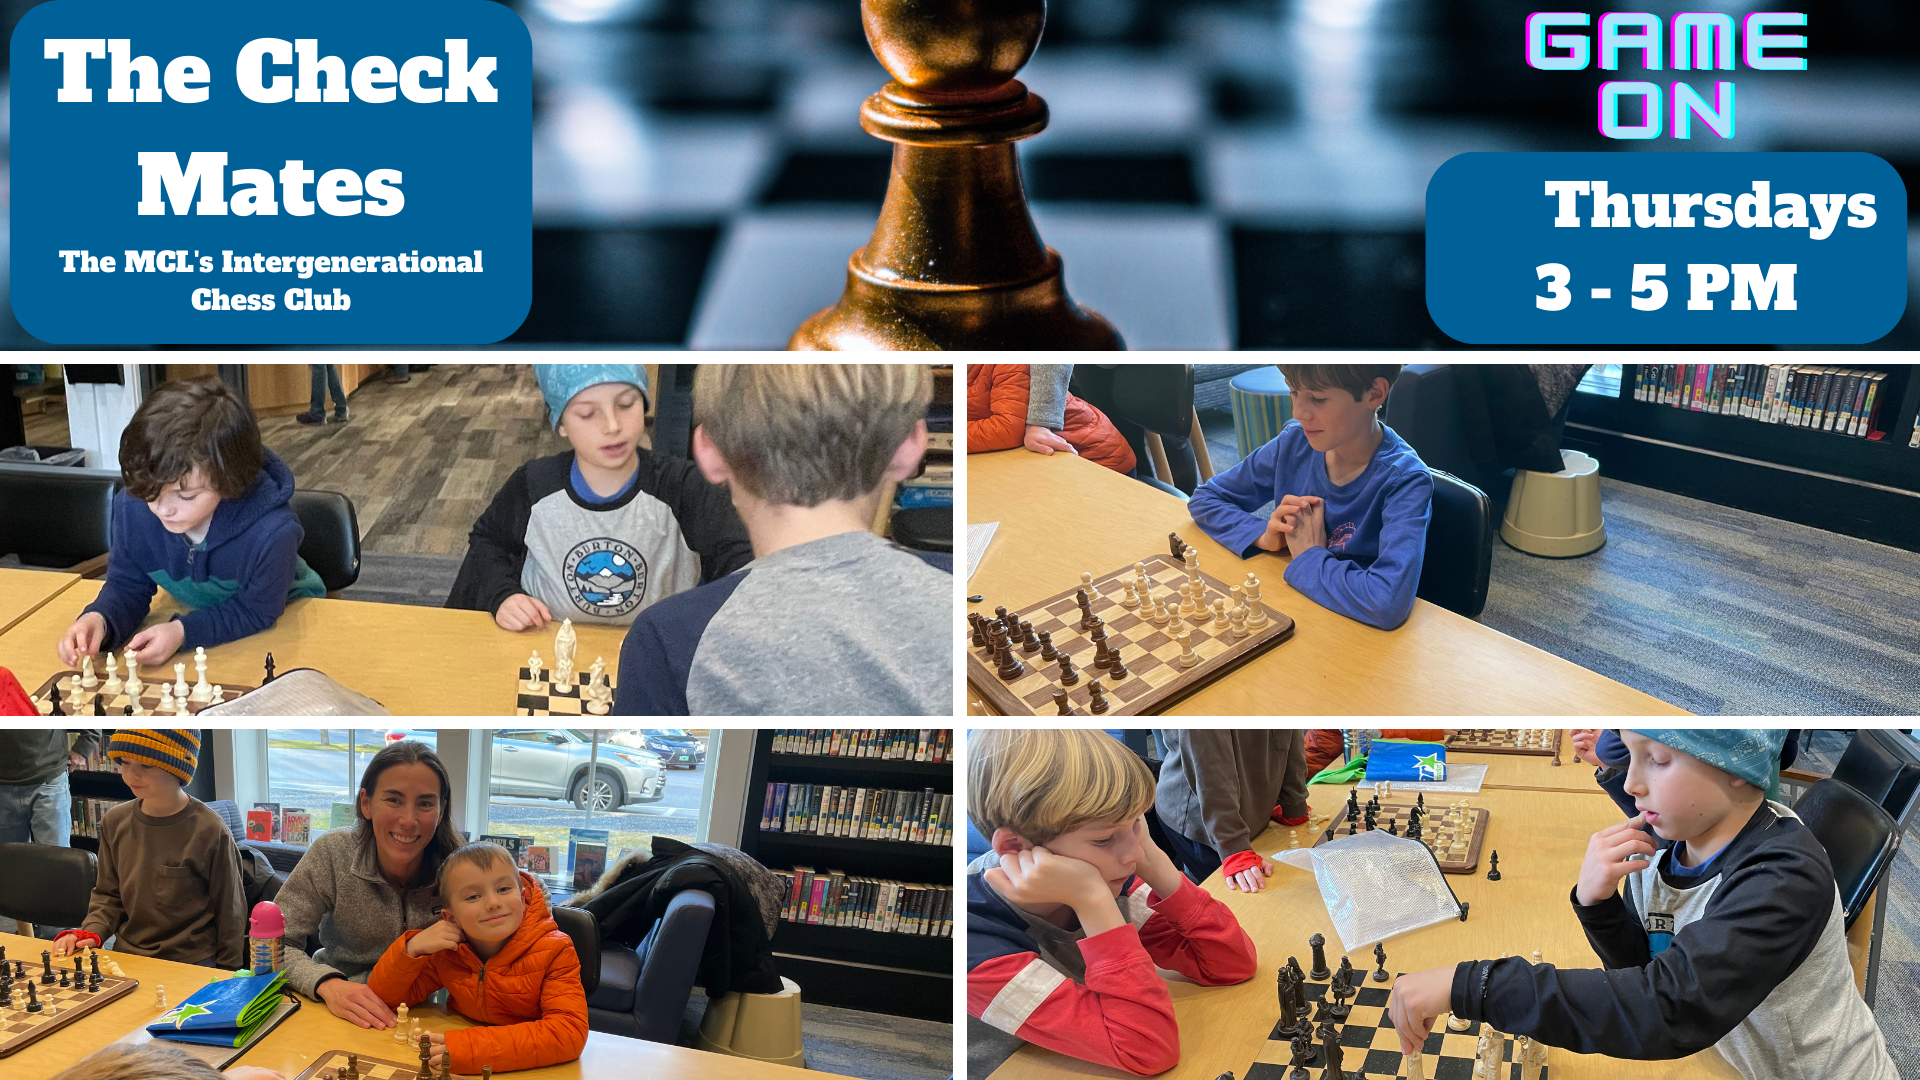 The Check Mates Intergenerational Chess Club meets Thursdays from 3 to 5 p.m. at the MCL.